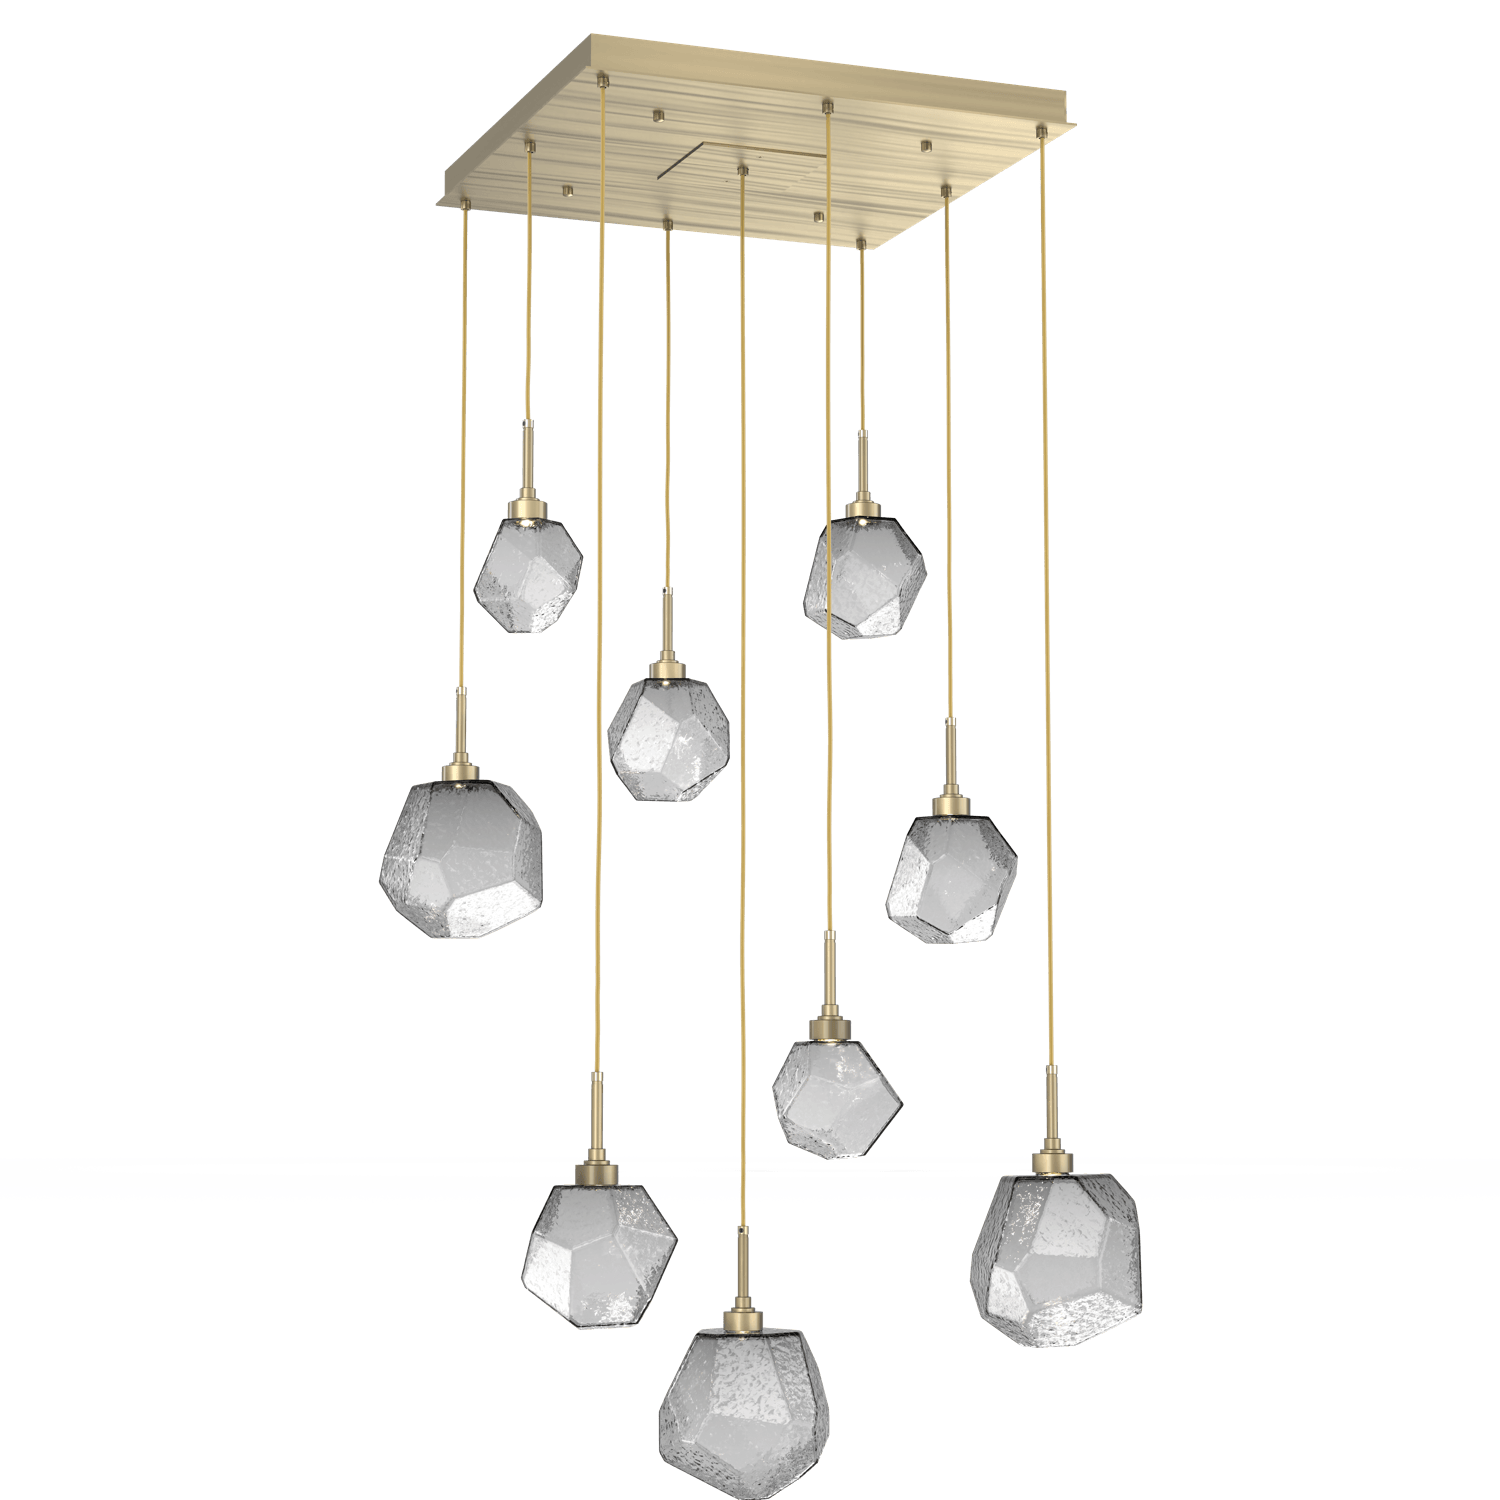 CHB0039-09-HB-S-Hammerton-Studio-Gem-9-light-square-pendant-chandelier-with-heritage-brass-finish-and-smoke-blown-glass-shades-and-LED-lamping